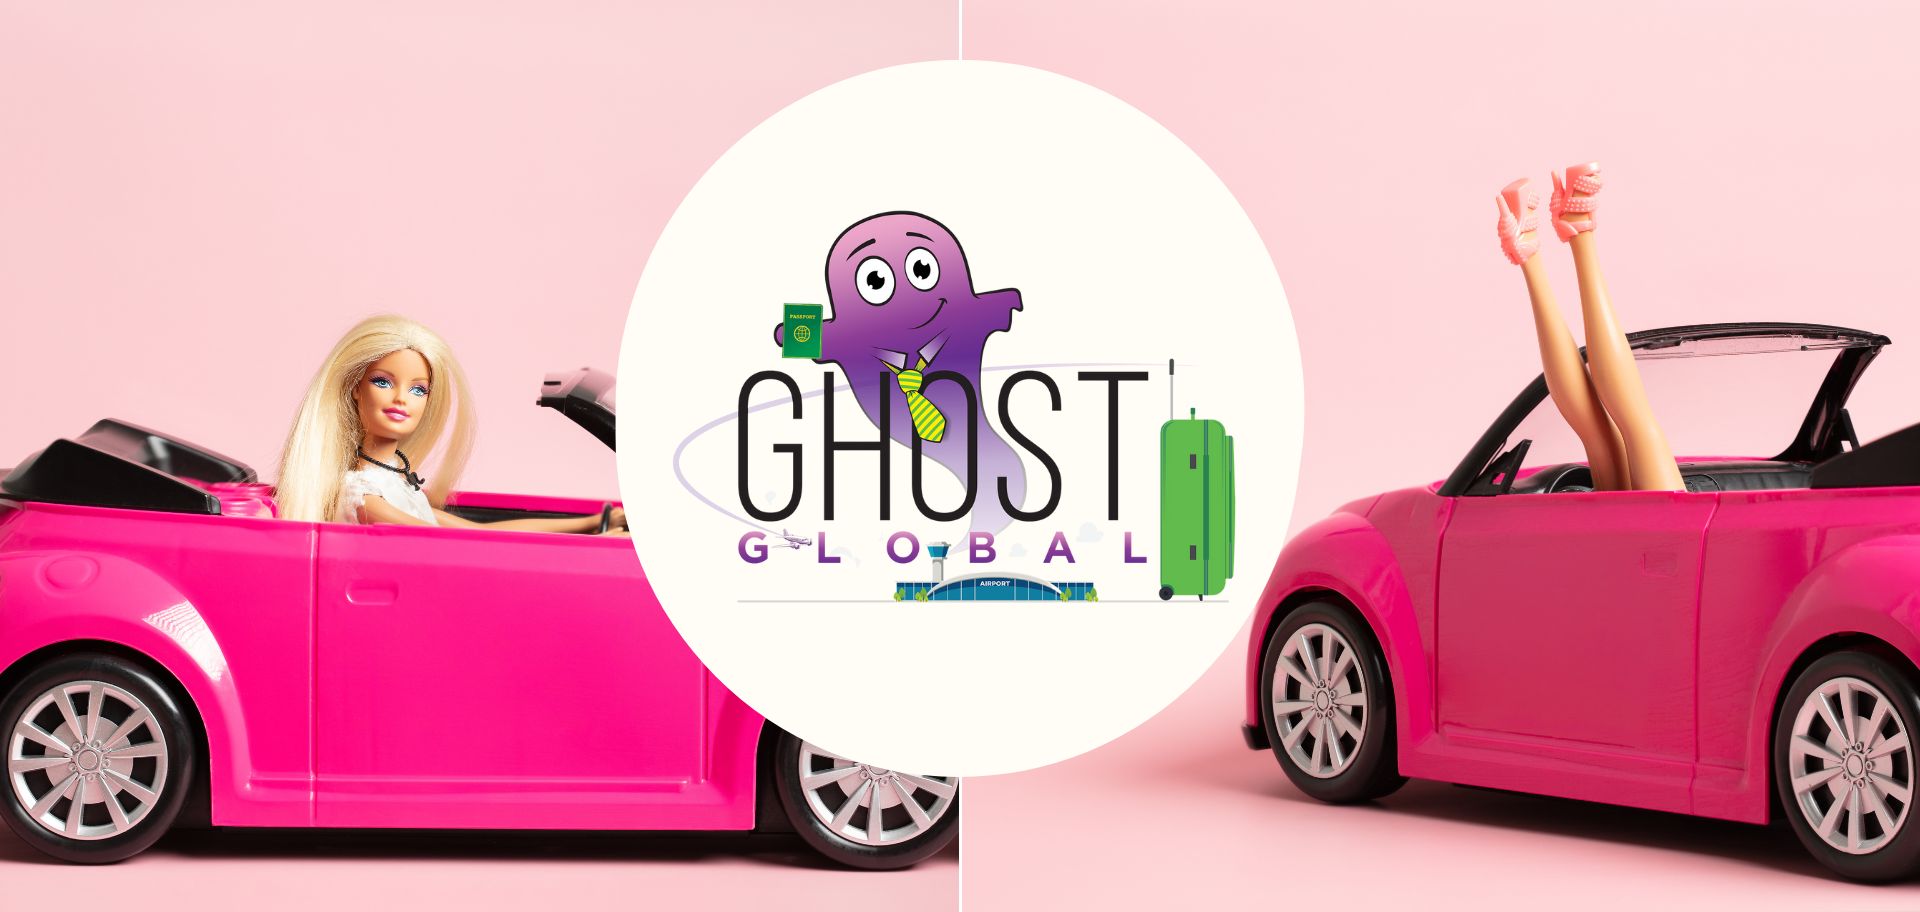 Ghost Global: the business of nostalgia